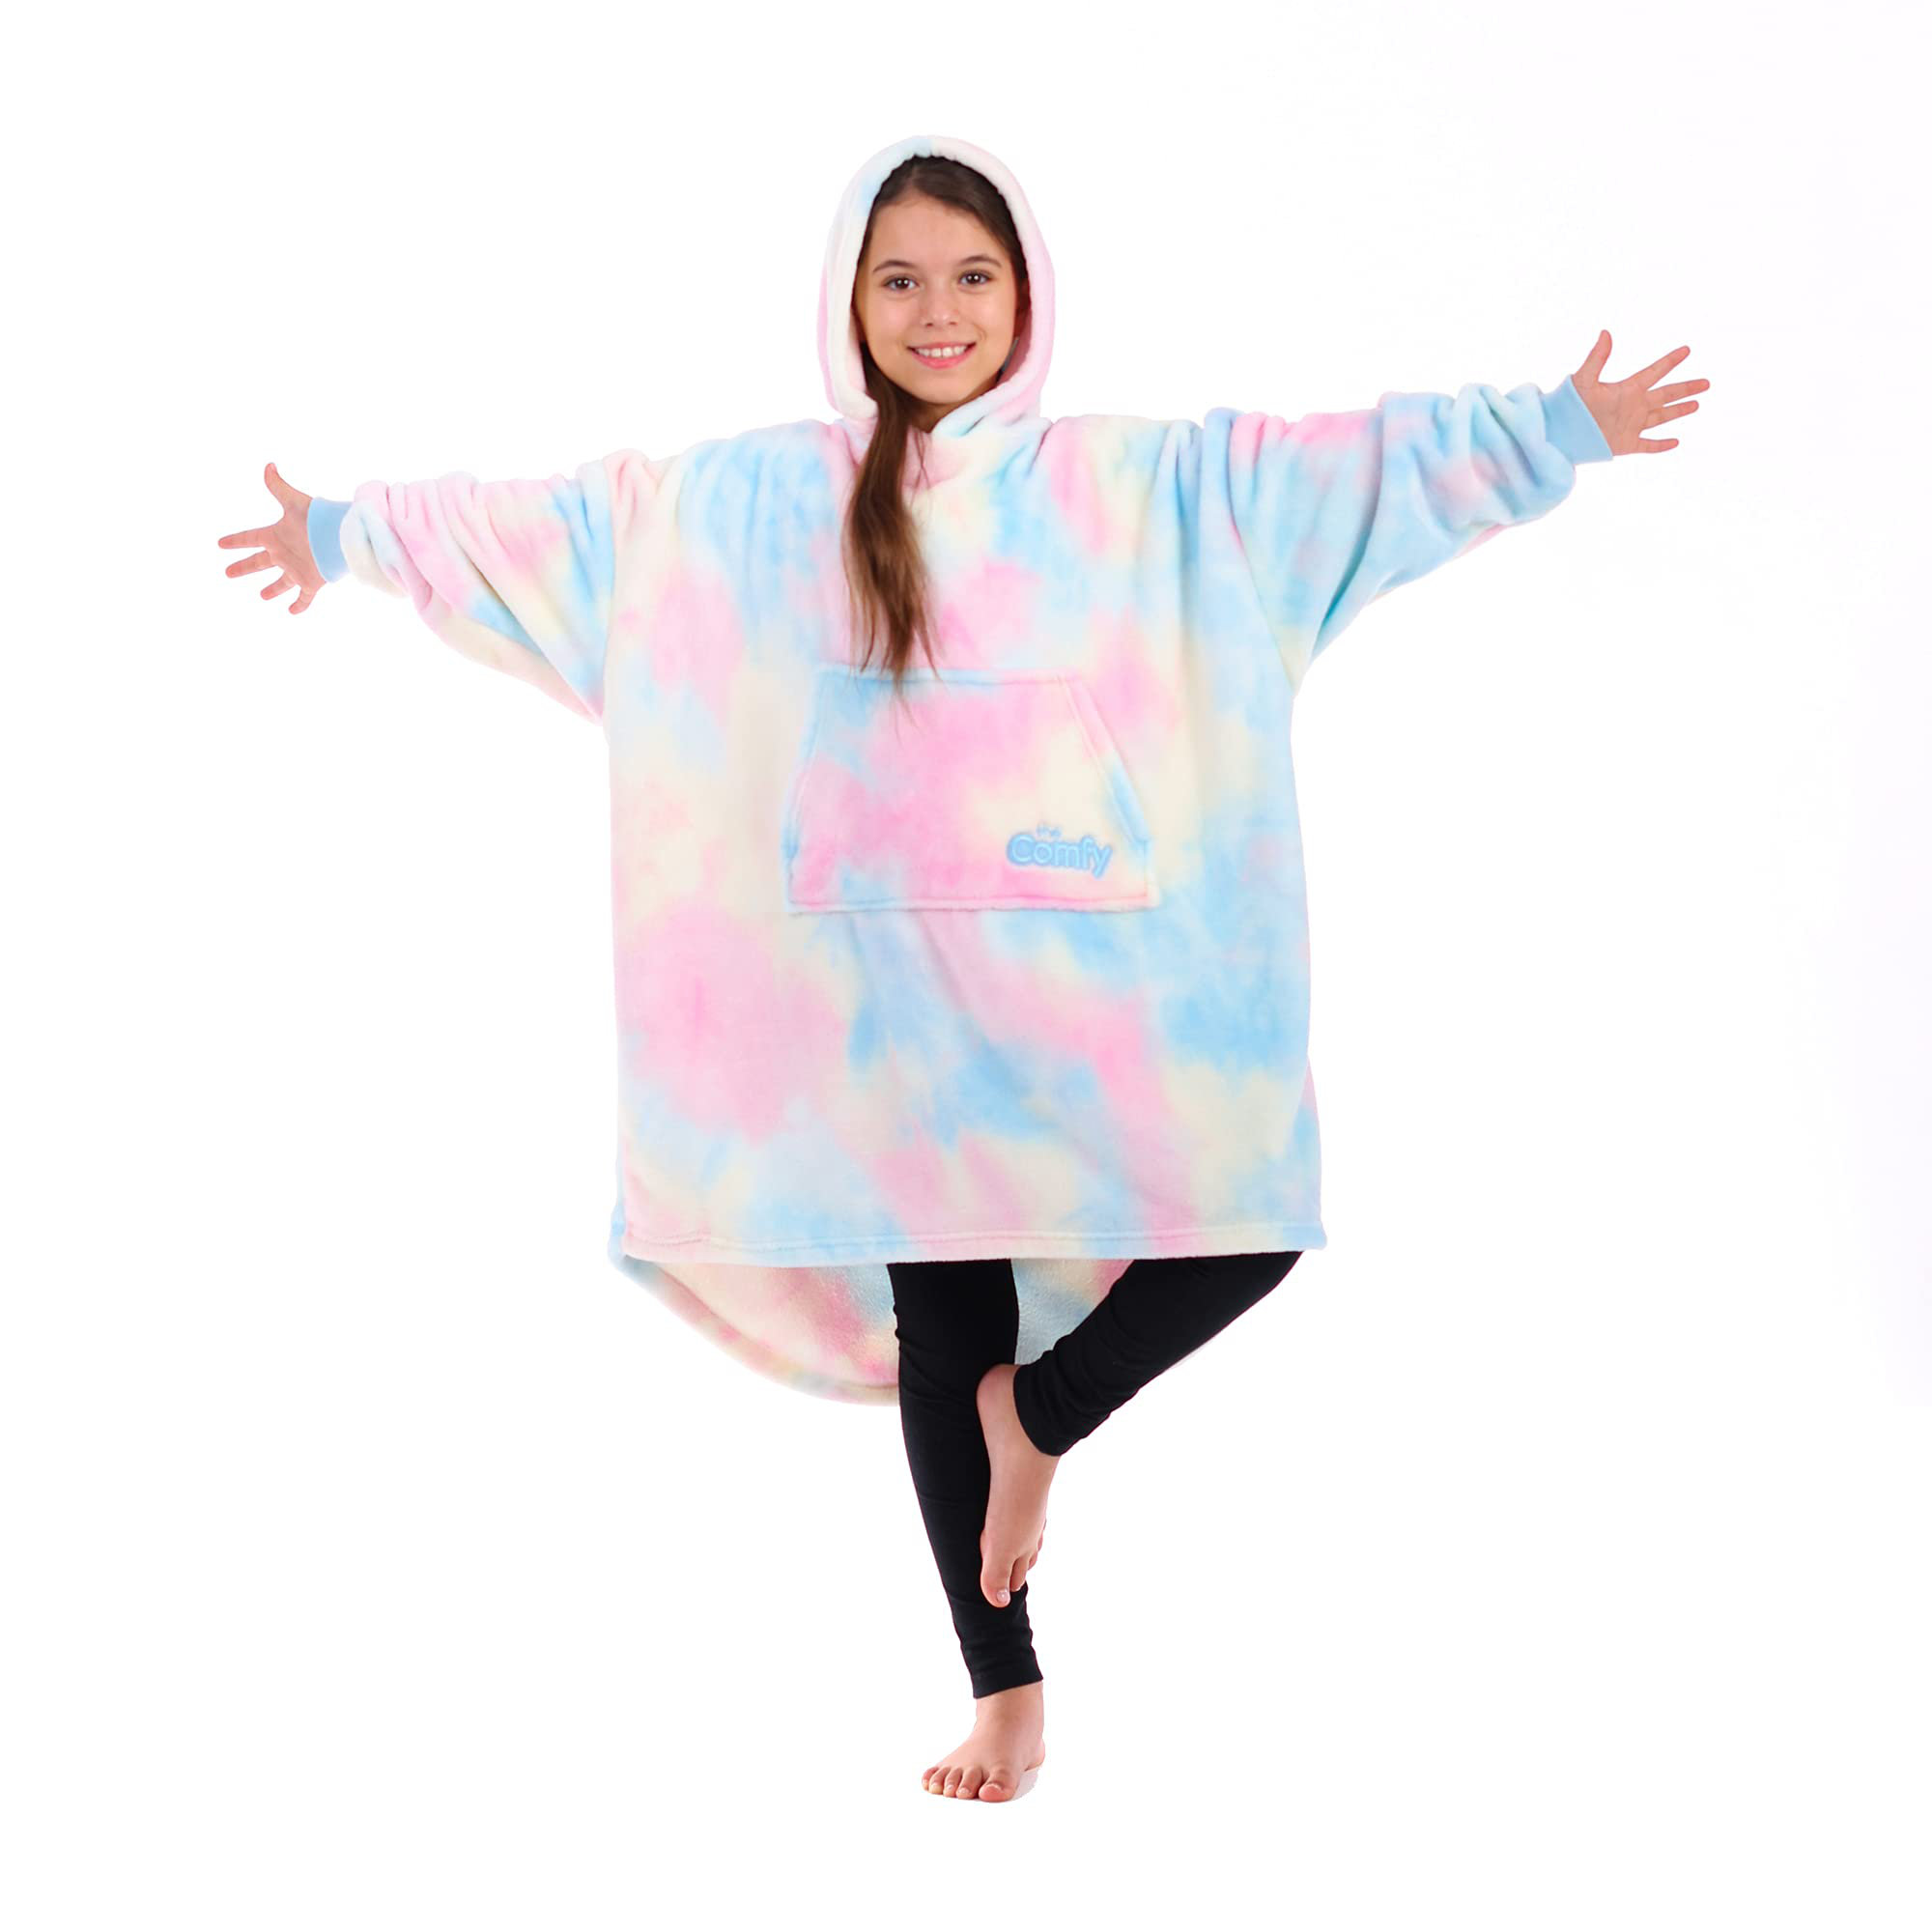 The Comfy Original Jr  Comfy hoodies, Oversized style, Wearable blanket